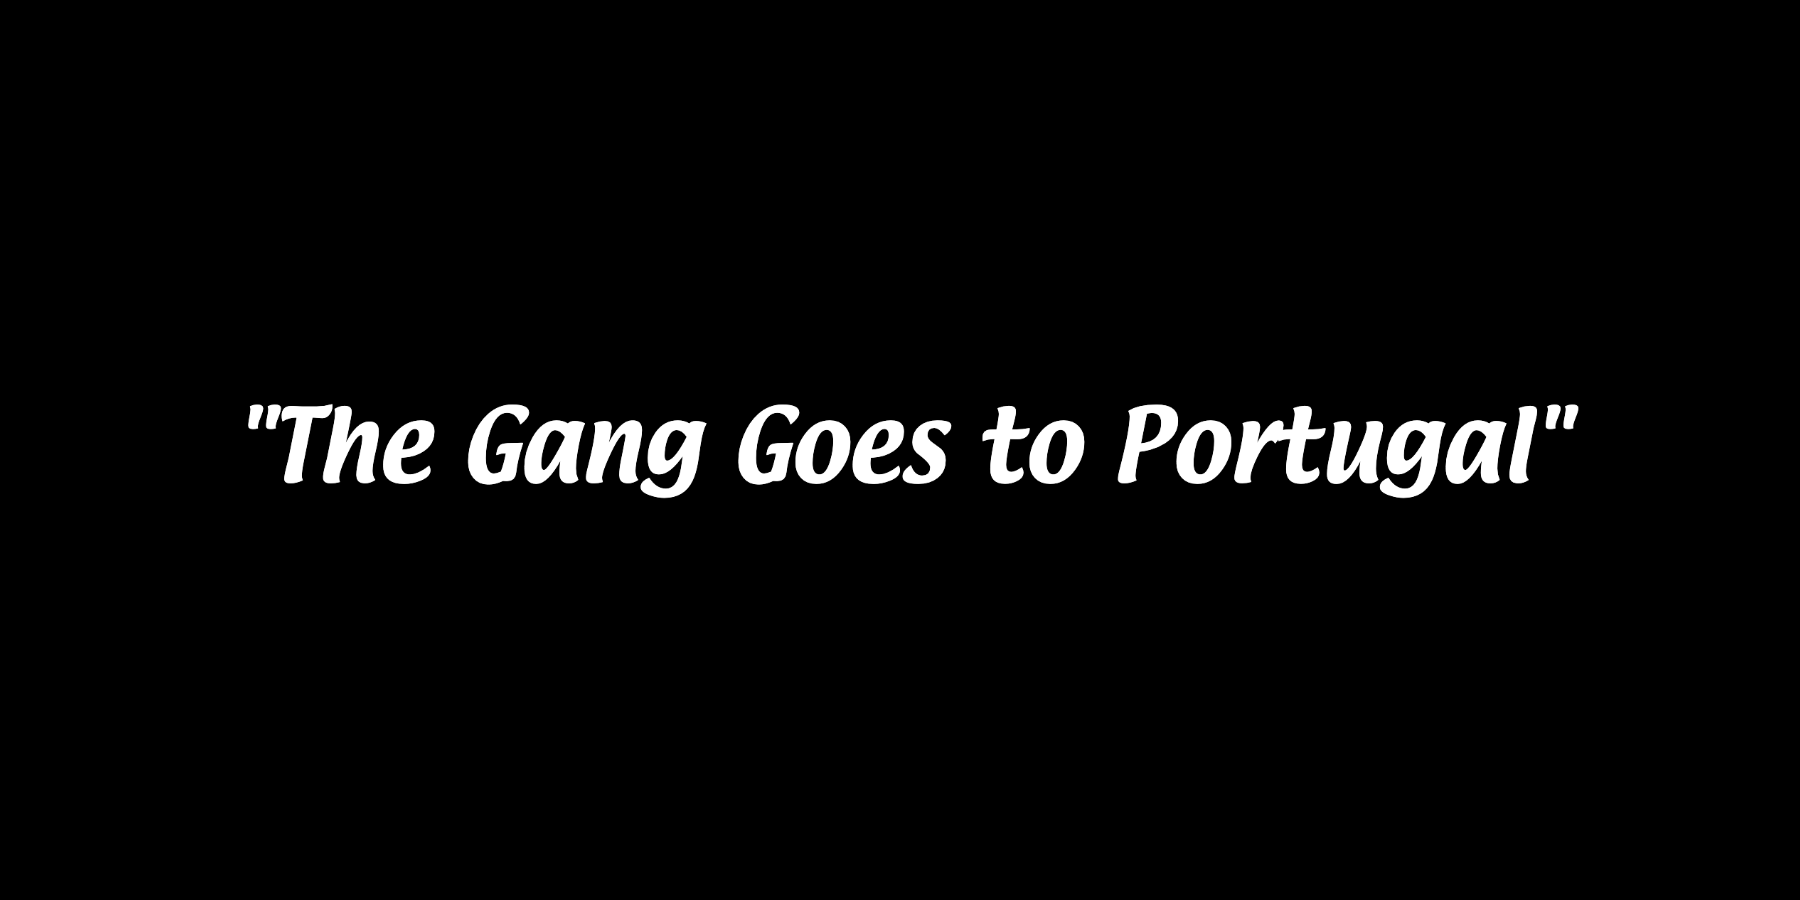 The gang goes to Portugal